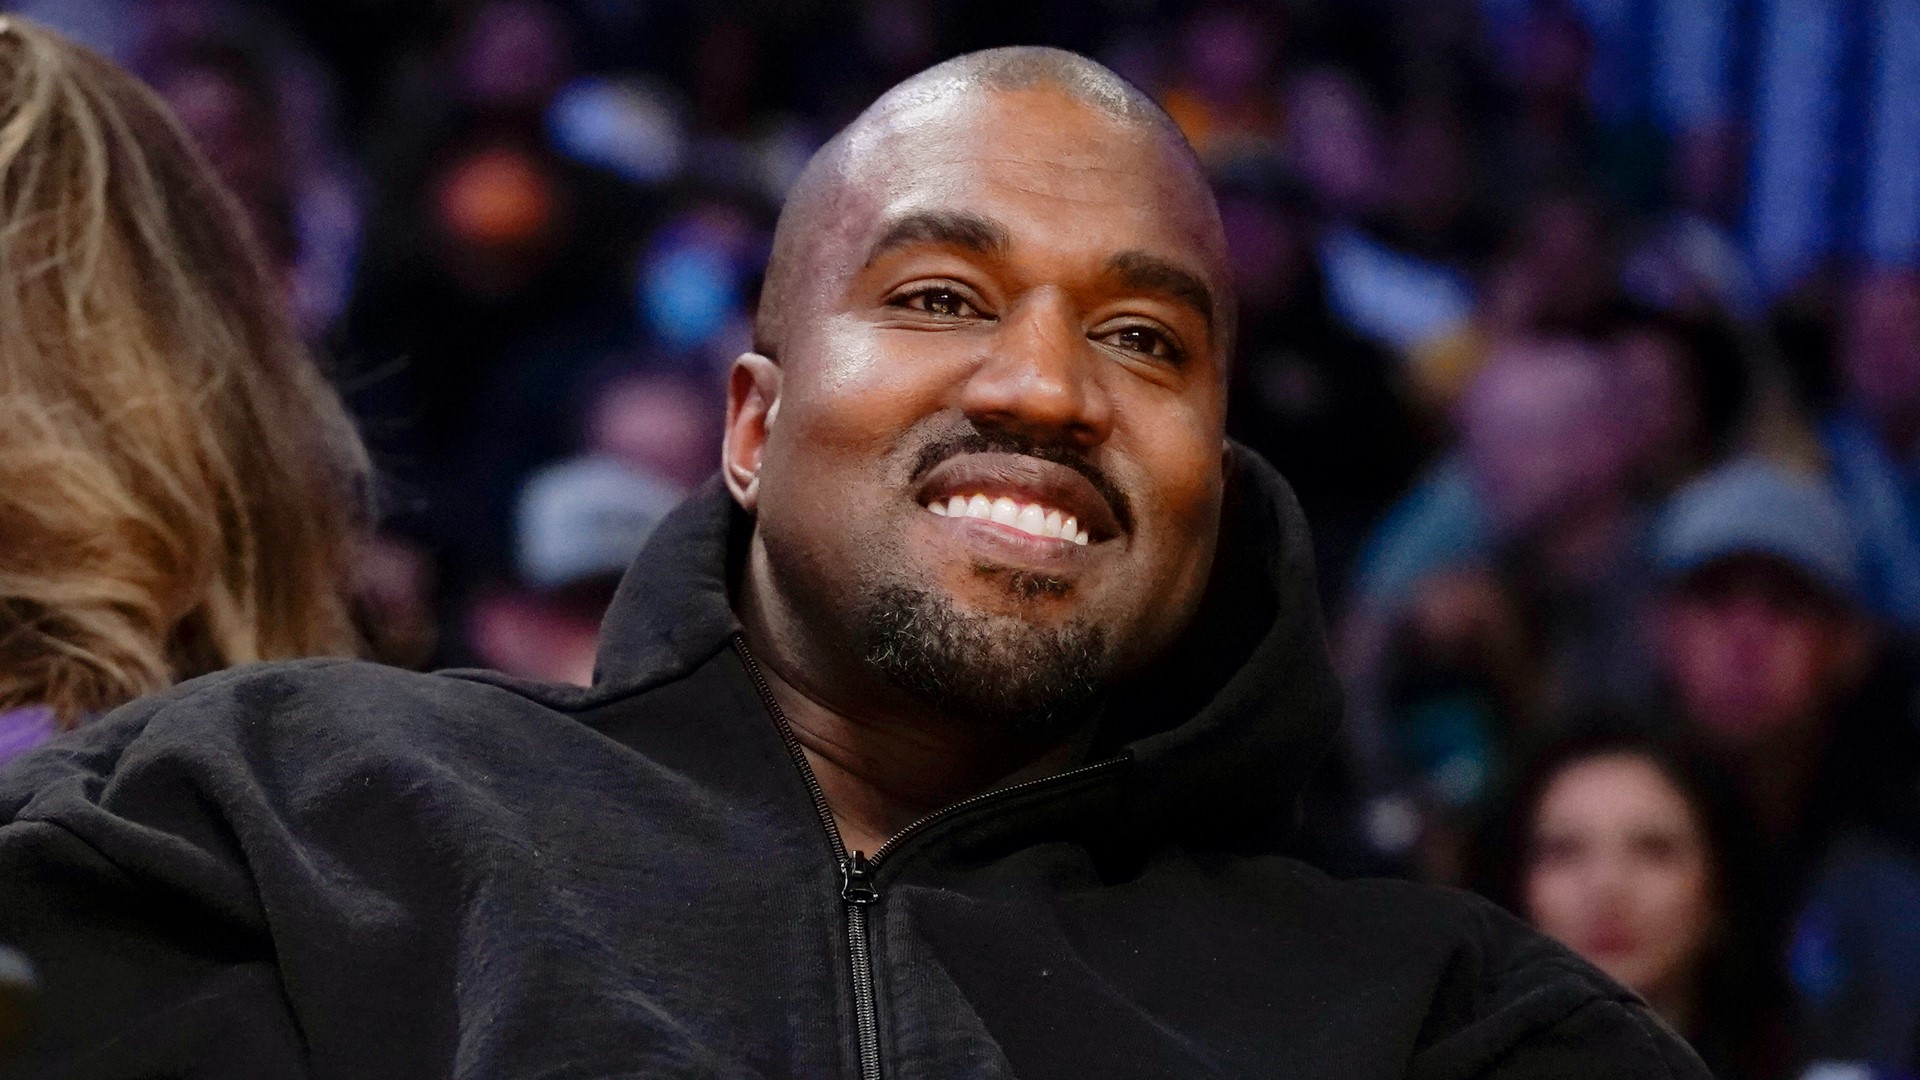 Ye was suspended from Twitter and Instagram over his offensive and antisemitic remarks but returned to Twitter after Elon Musk unbanned him.